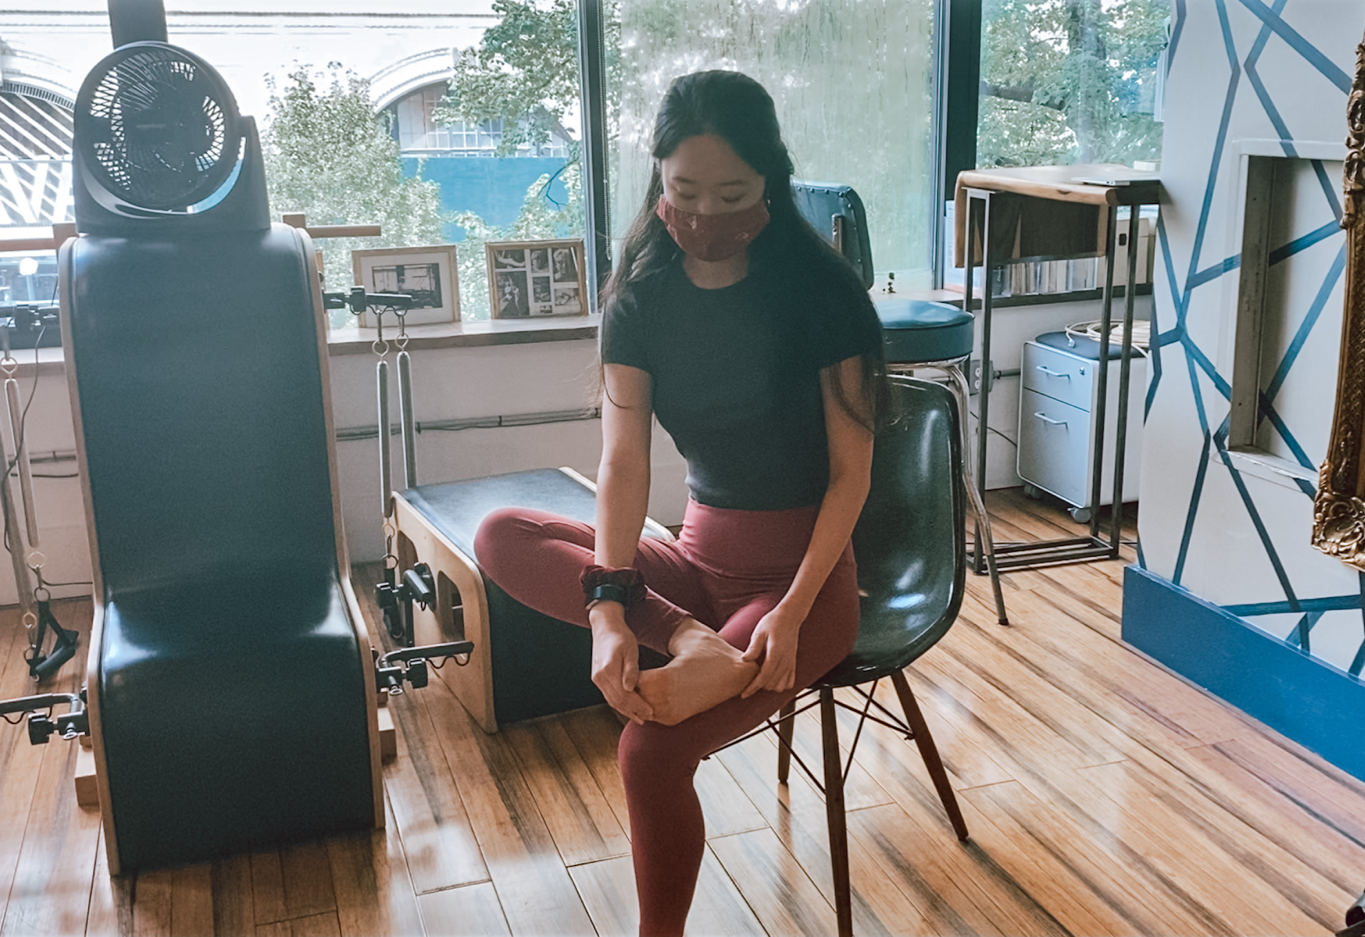 Dr. Vivian Zhang, Physical Therapist in Brooklyn New York, demonstrates physical therapy exercises for plantar fasciitis.